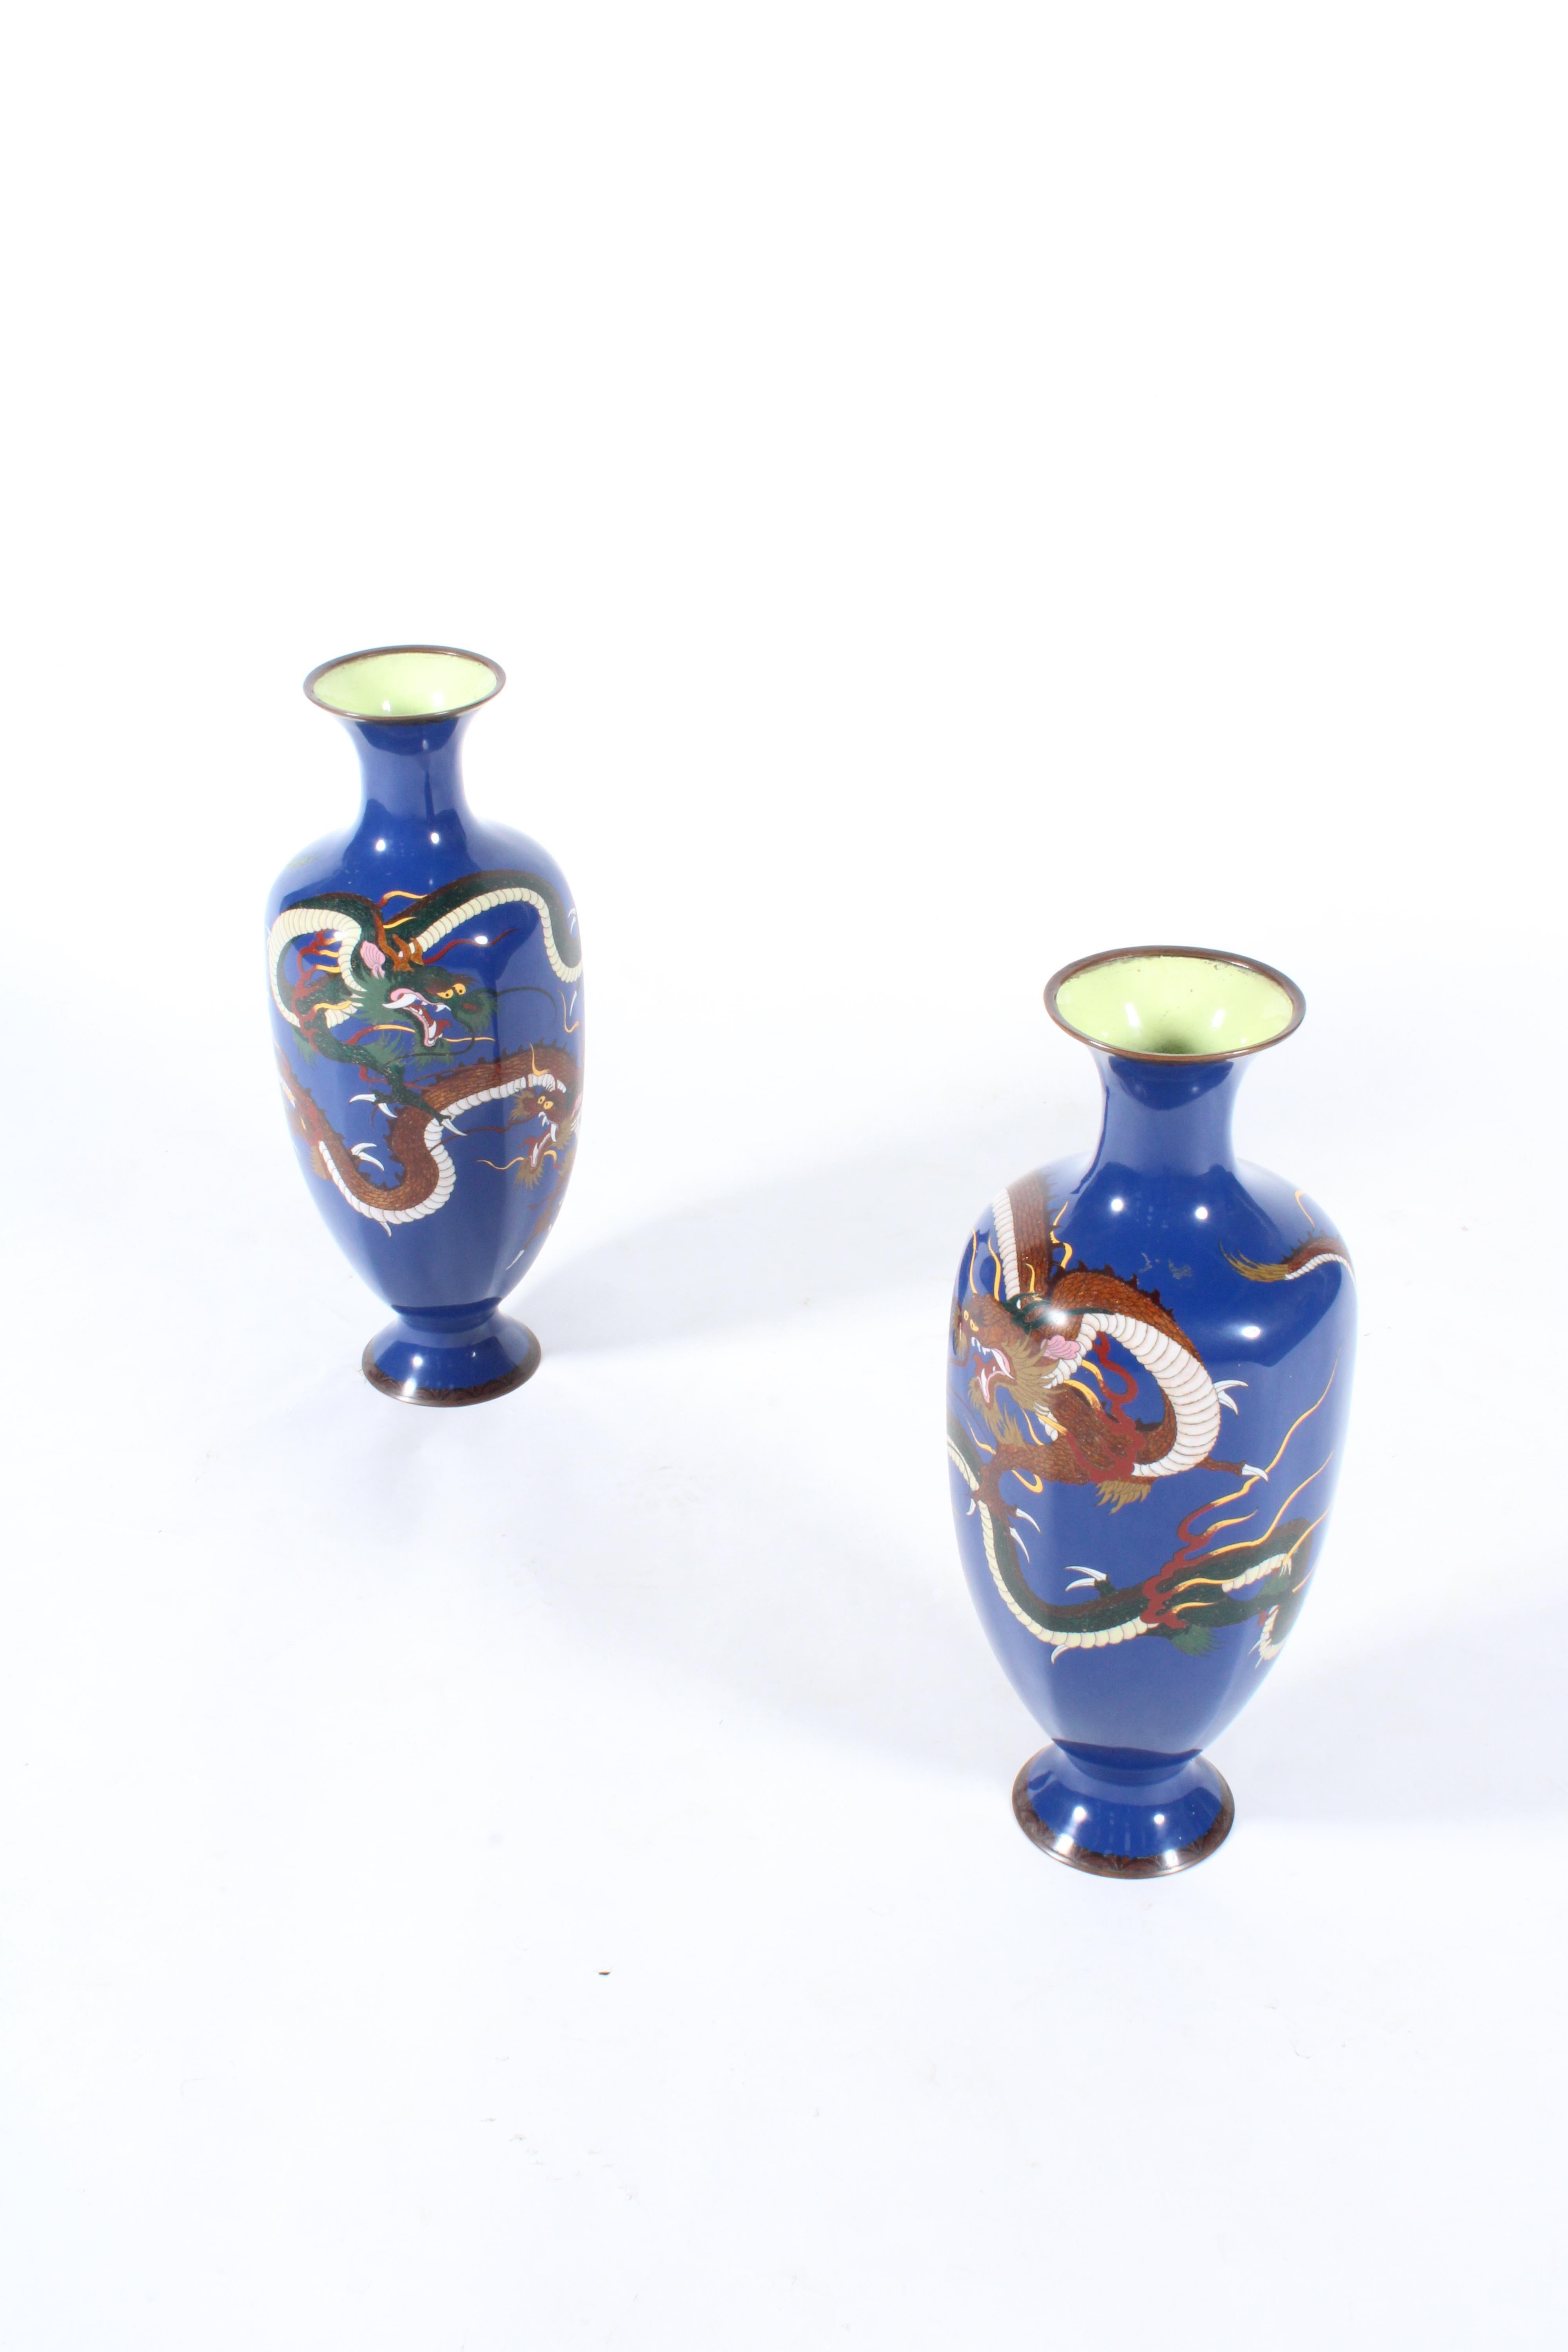 Pair of outstanding decorative mid century Japenese vases *Free Global Delivery 9